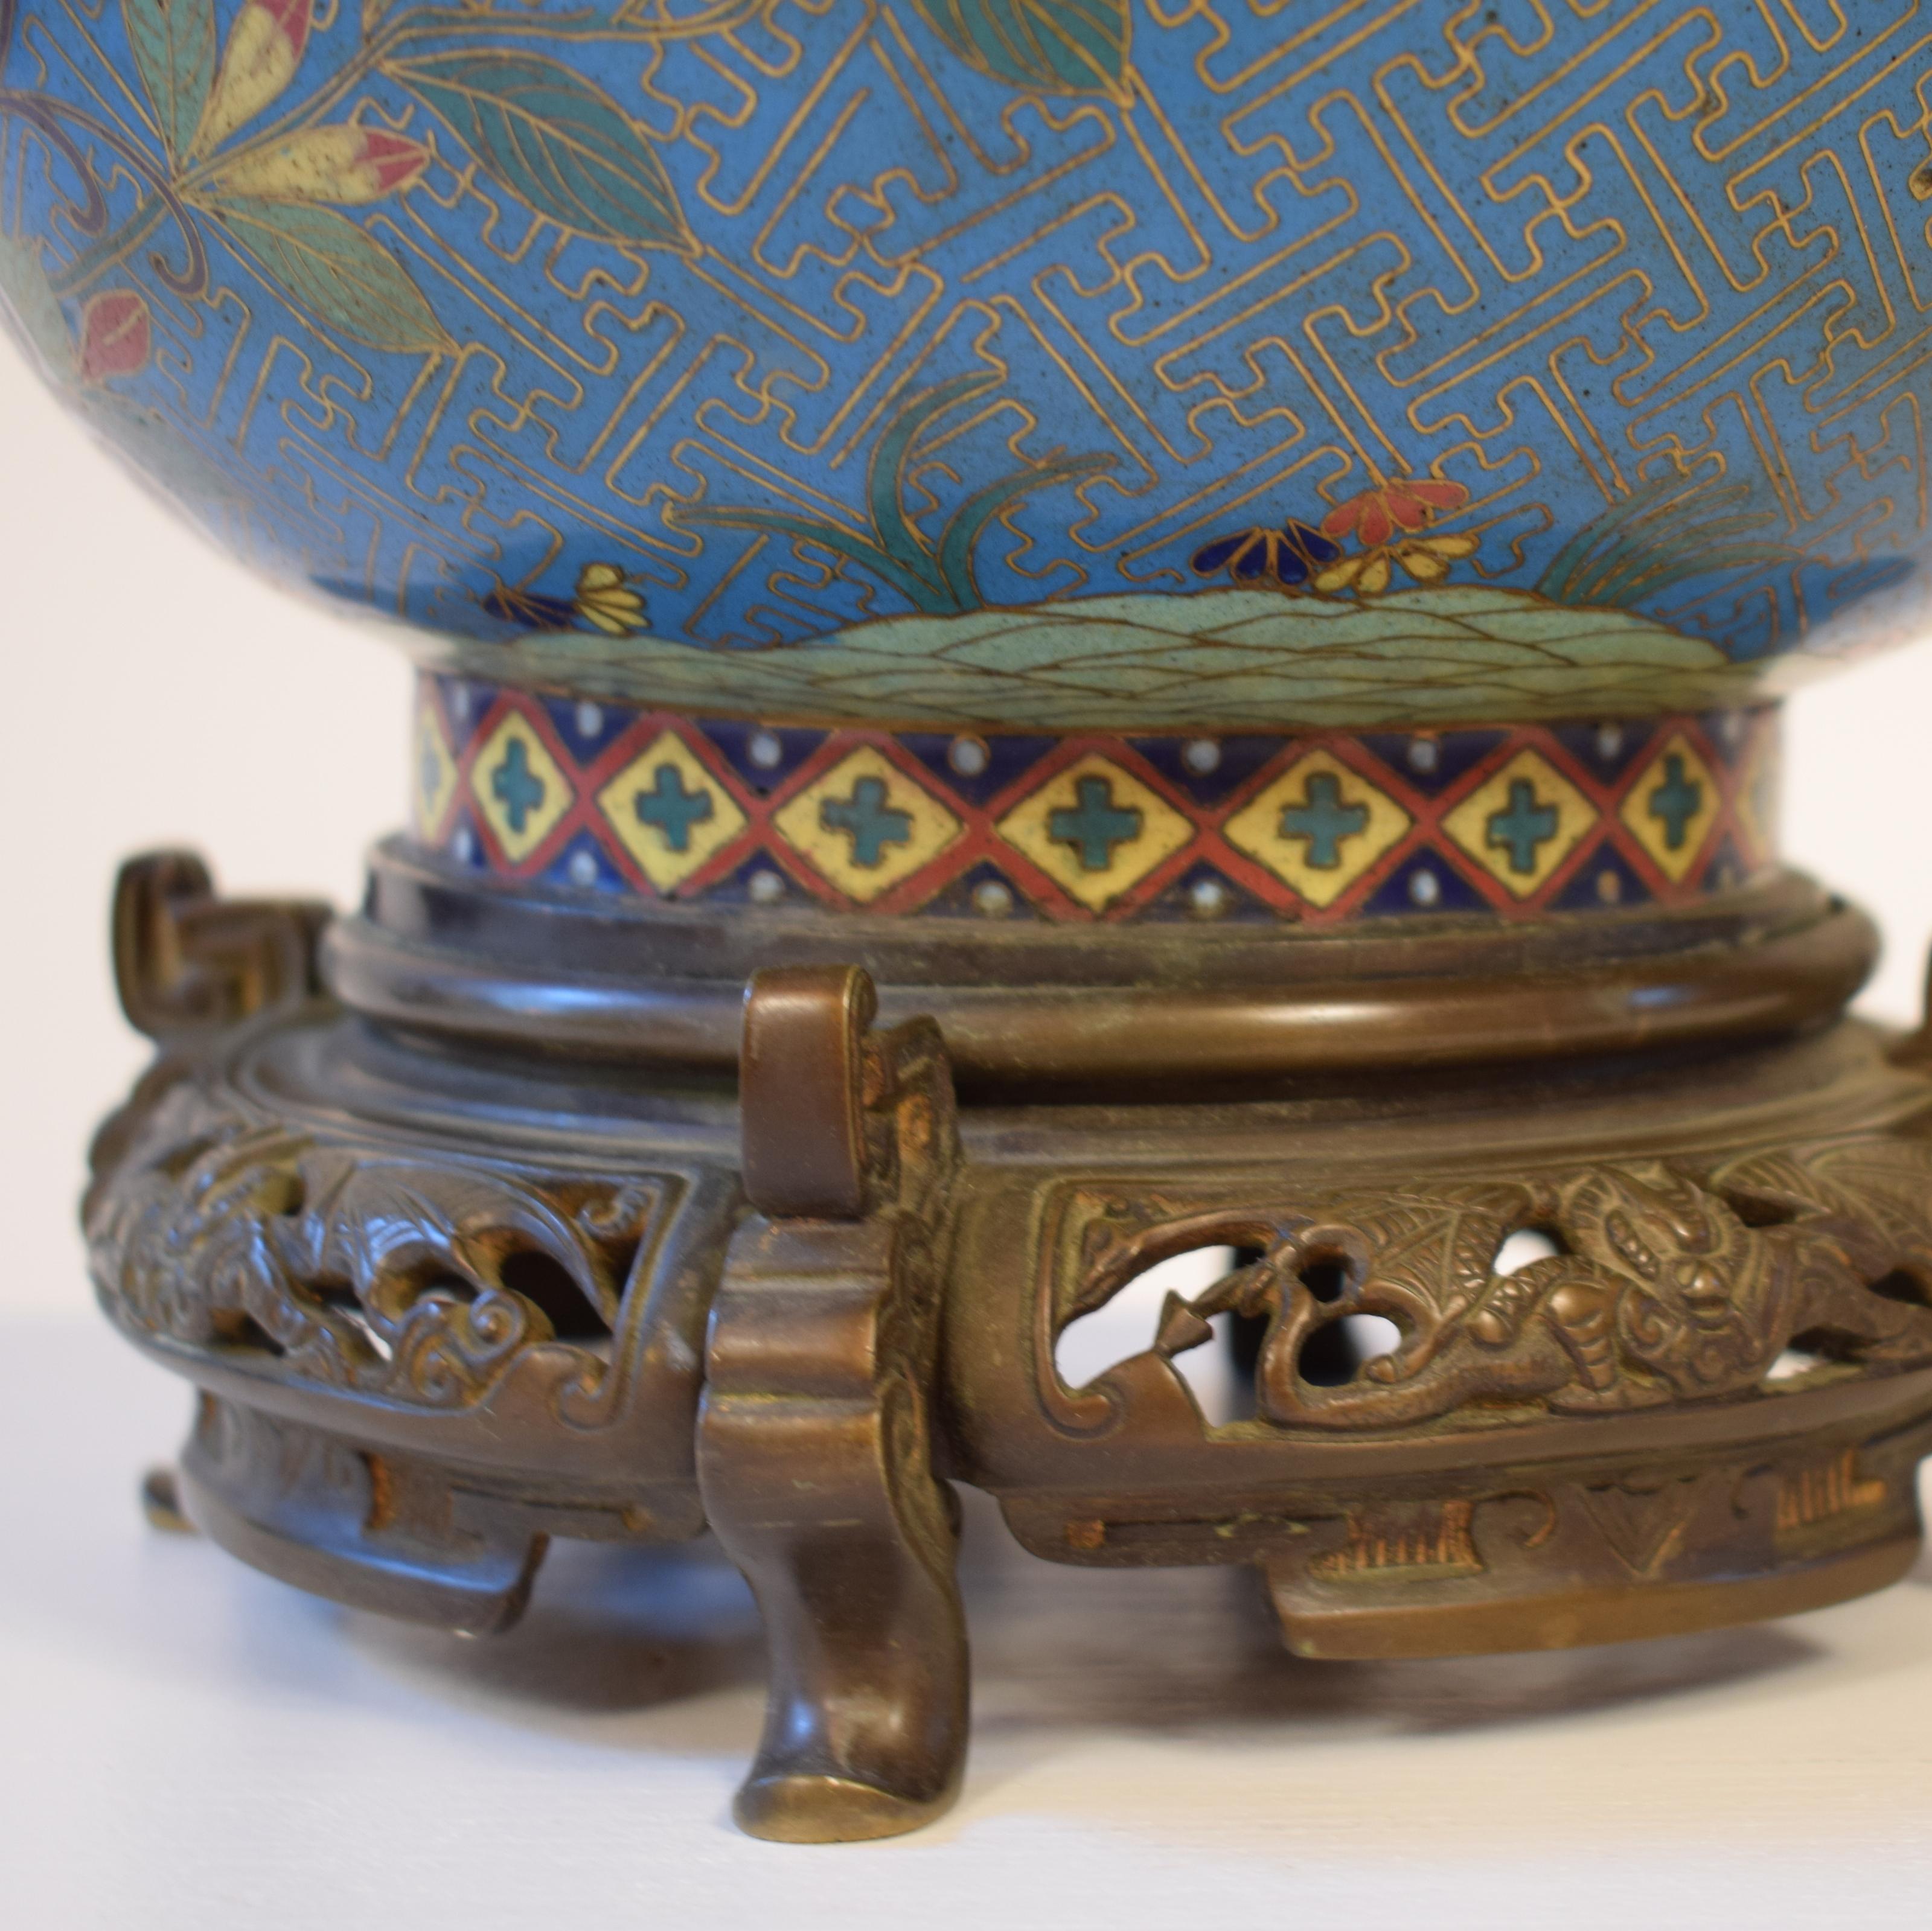 Chinese Export 19th Century Bronze-Mounted Chinese Enamel Coated Metal Table Lamp, circa 1880